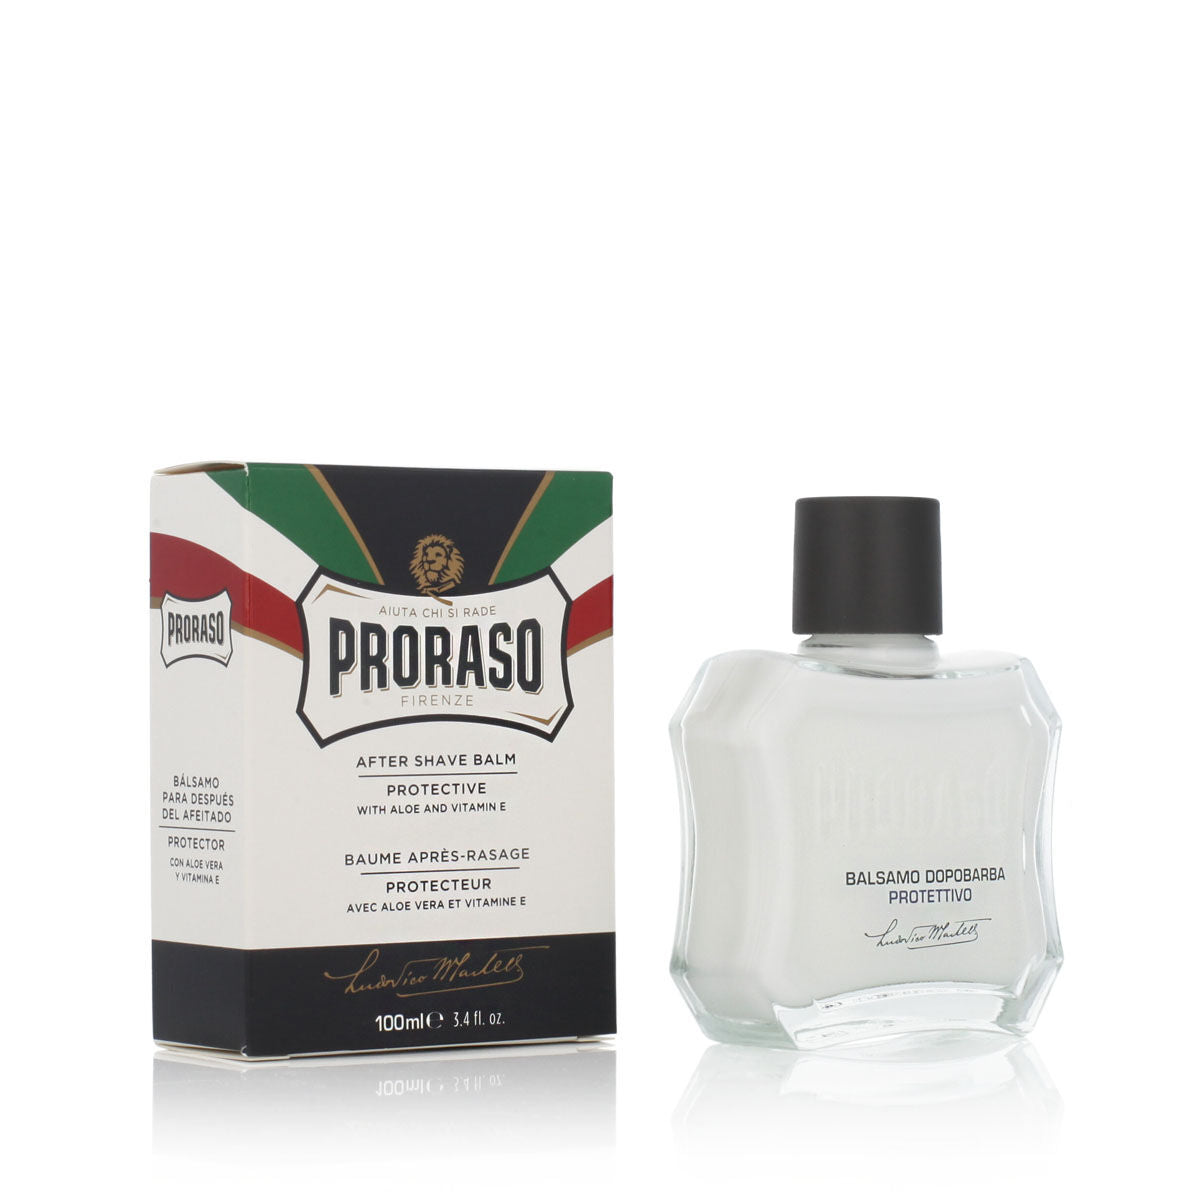 After Shave Balm Proraso Protective 100 ml